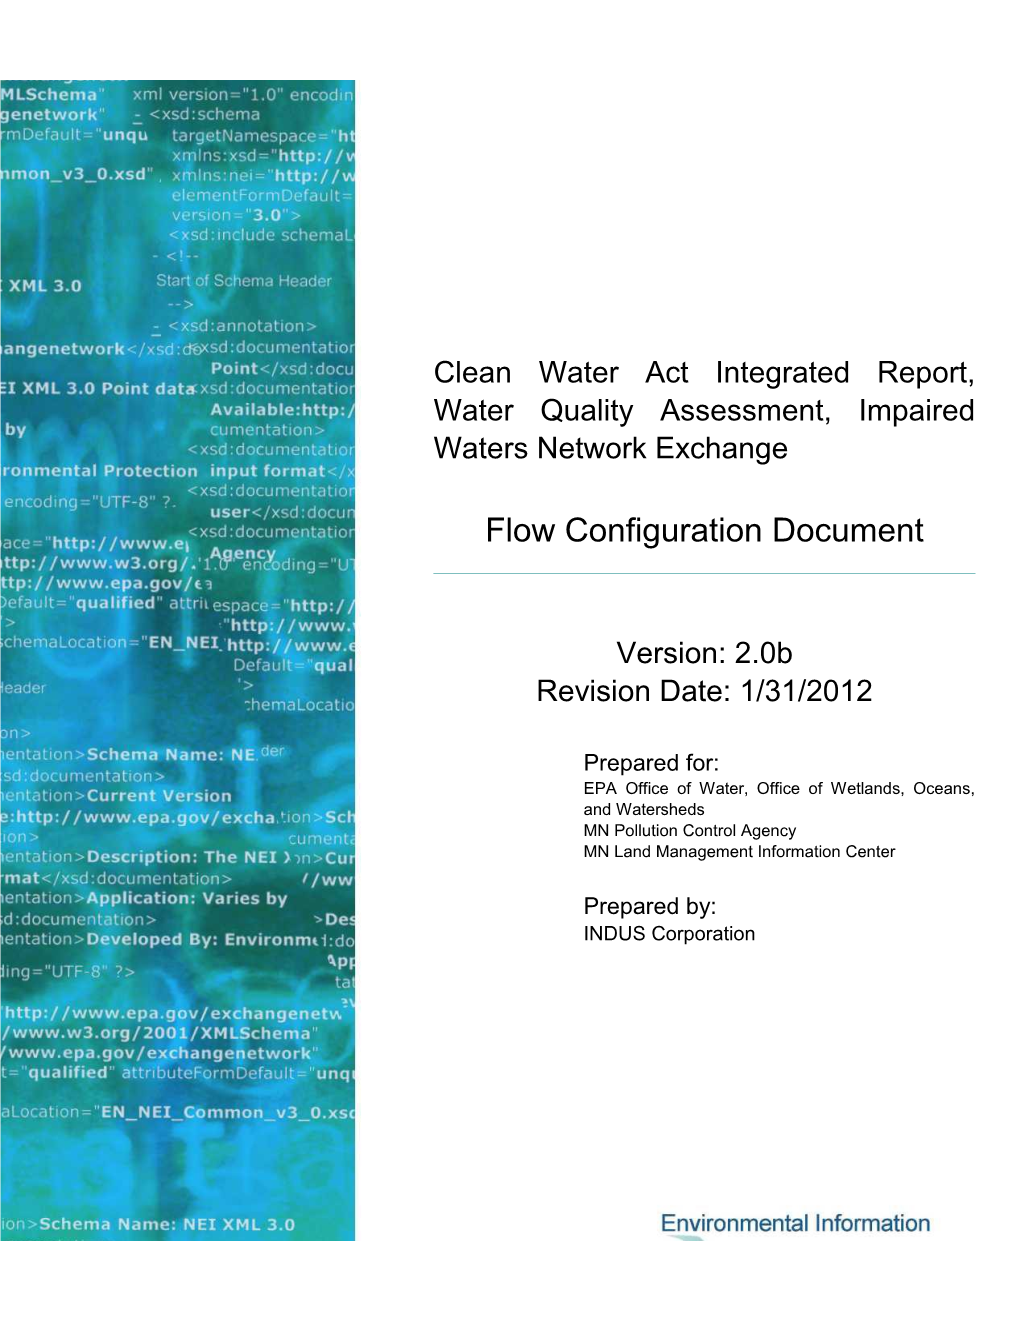 Office of Water Integrated Report Flow Configuration Document